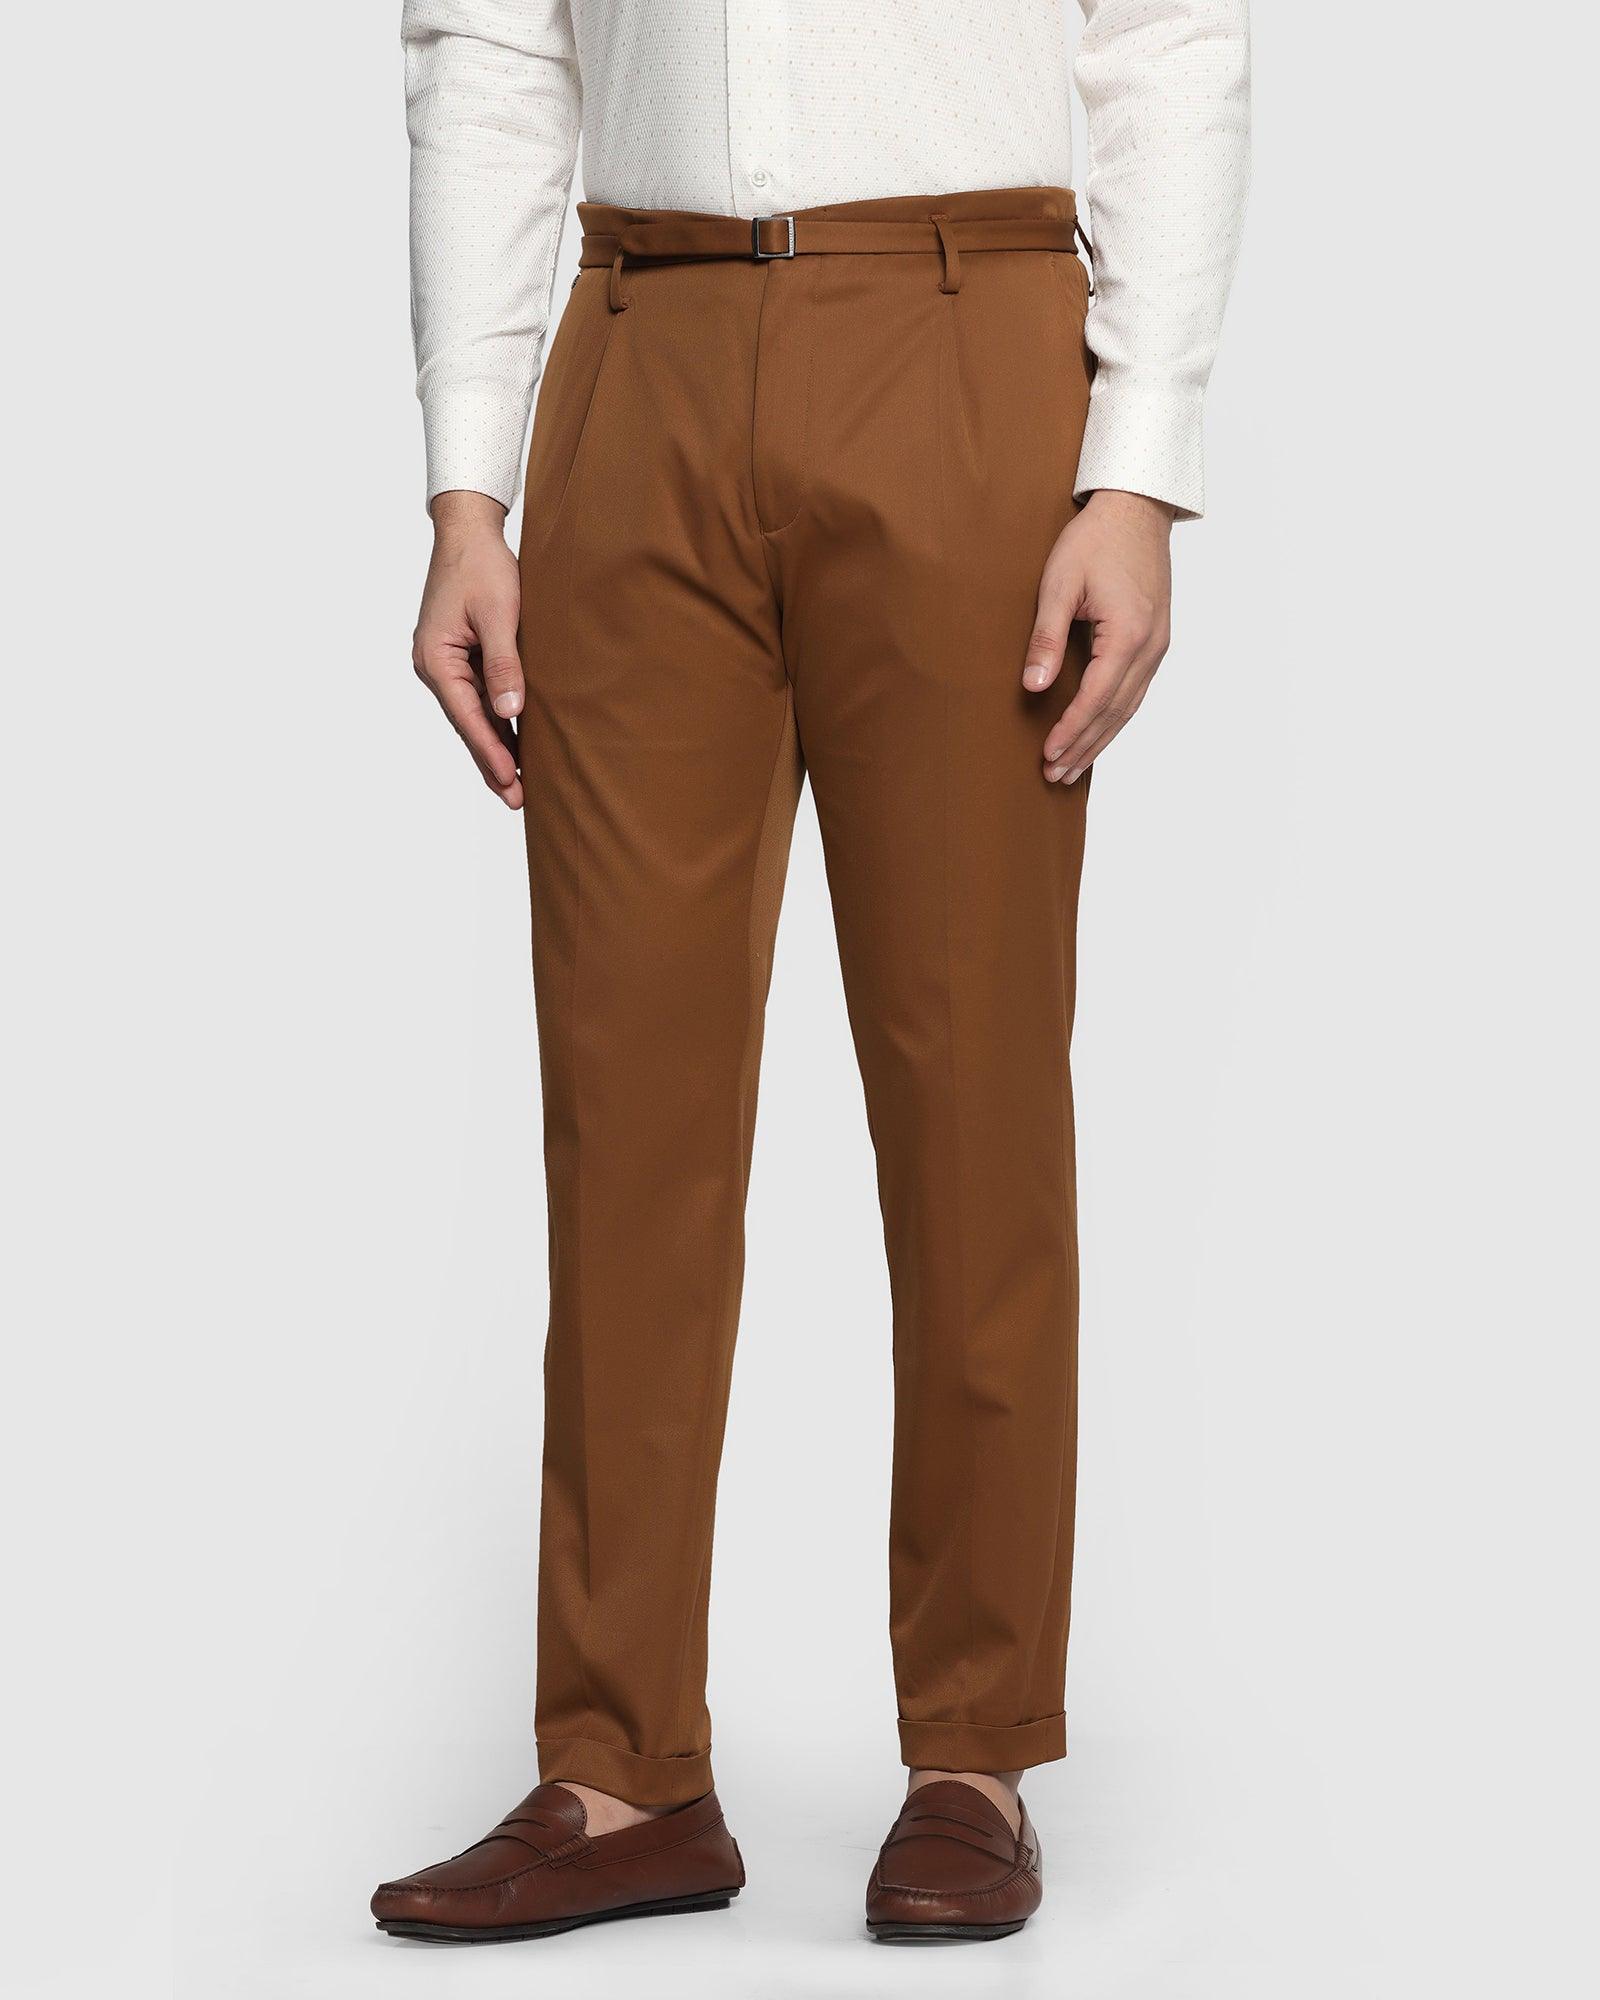 Nxt Formal Tobacco Brown Solid Trouser - Silas